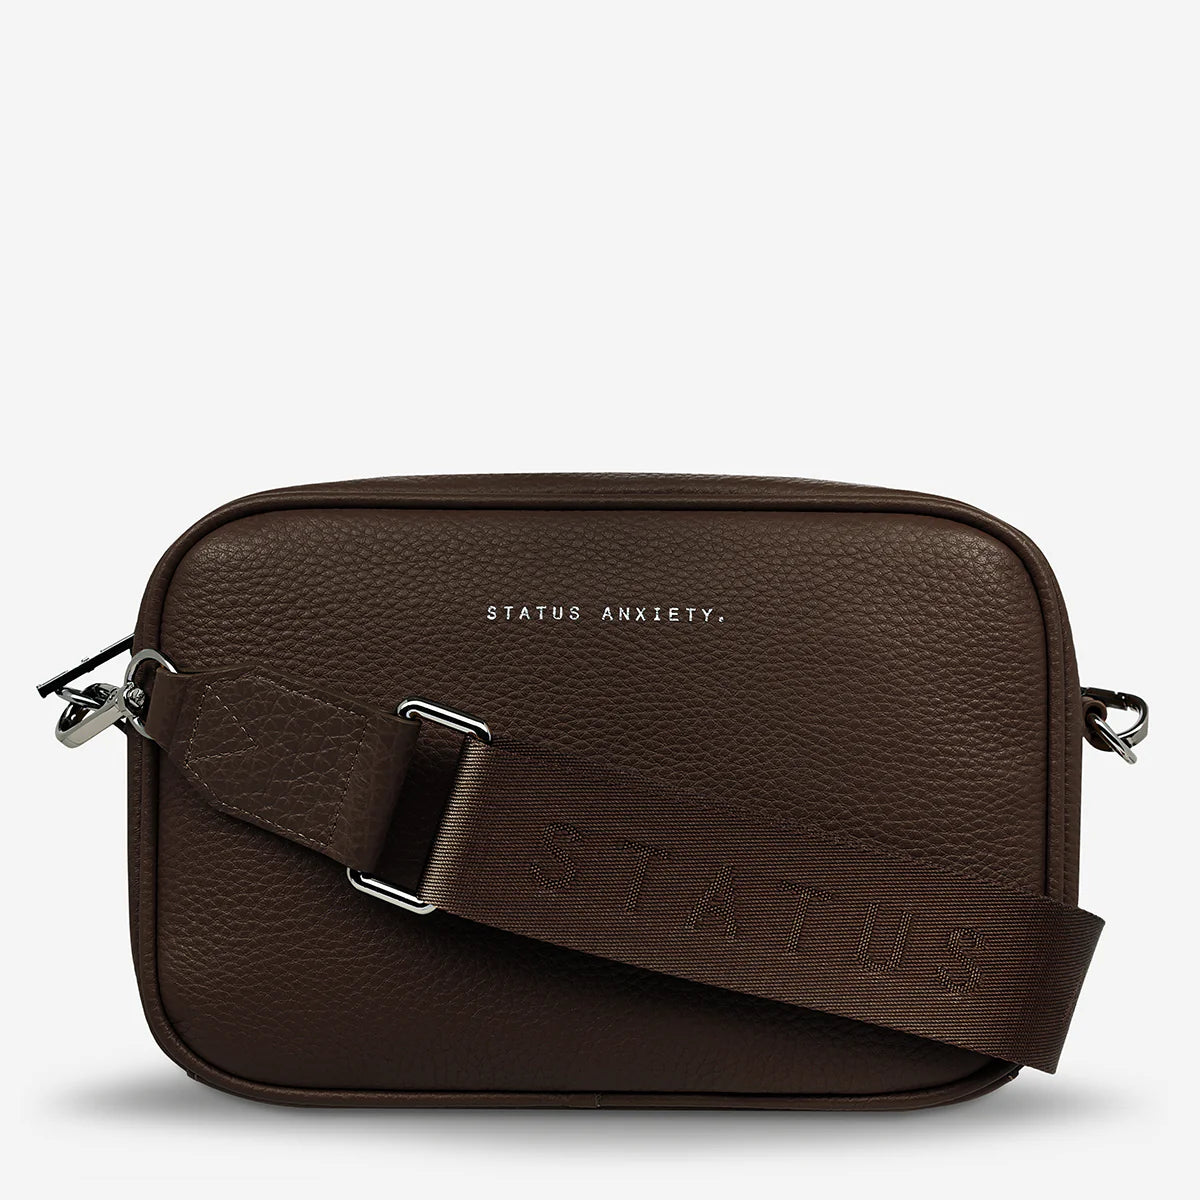 Status Anxiety II PLUNDER WITH WEBBED STRAP - Cocoa